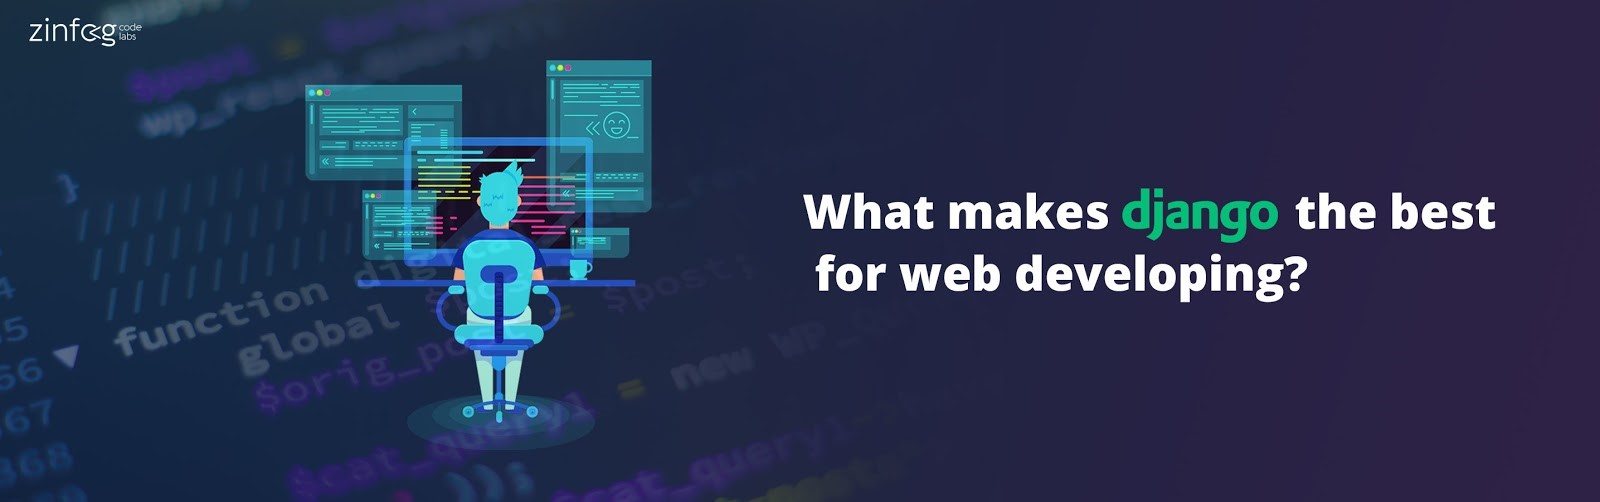 what_makes_django_the_best_for_web_developing.html